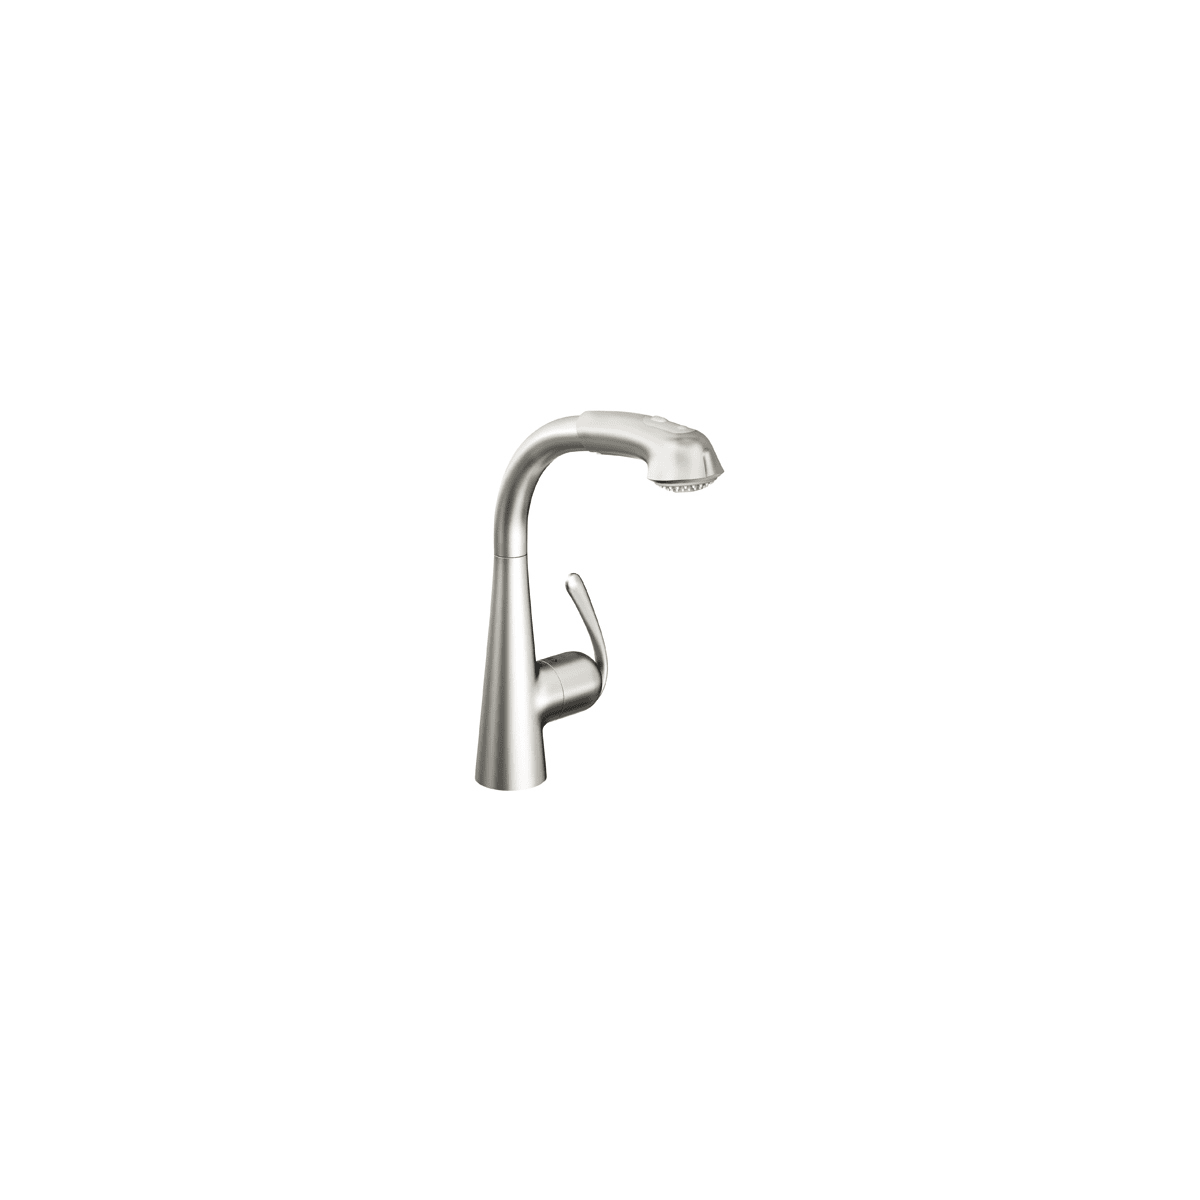 Grohe 3389300e Starlight Chrome Ladylux3 Pull Out Kitchen Faucet